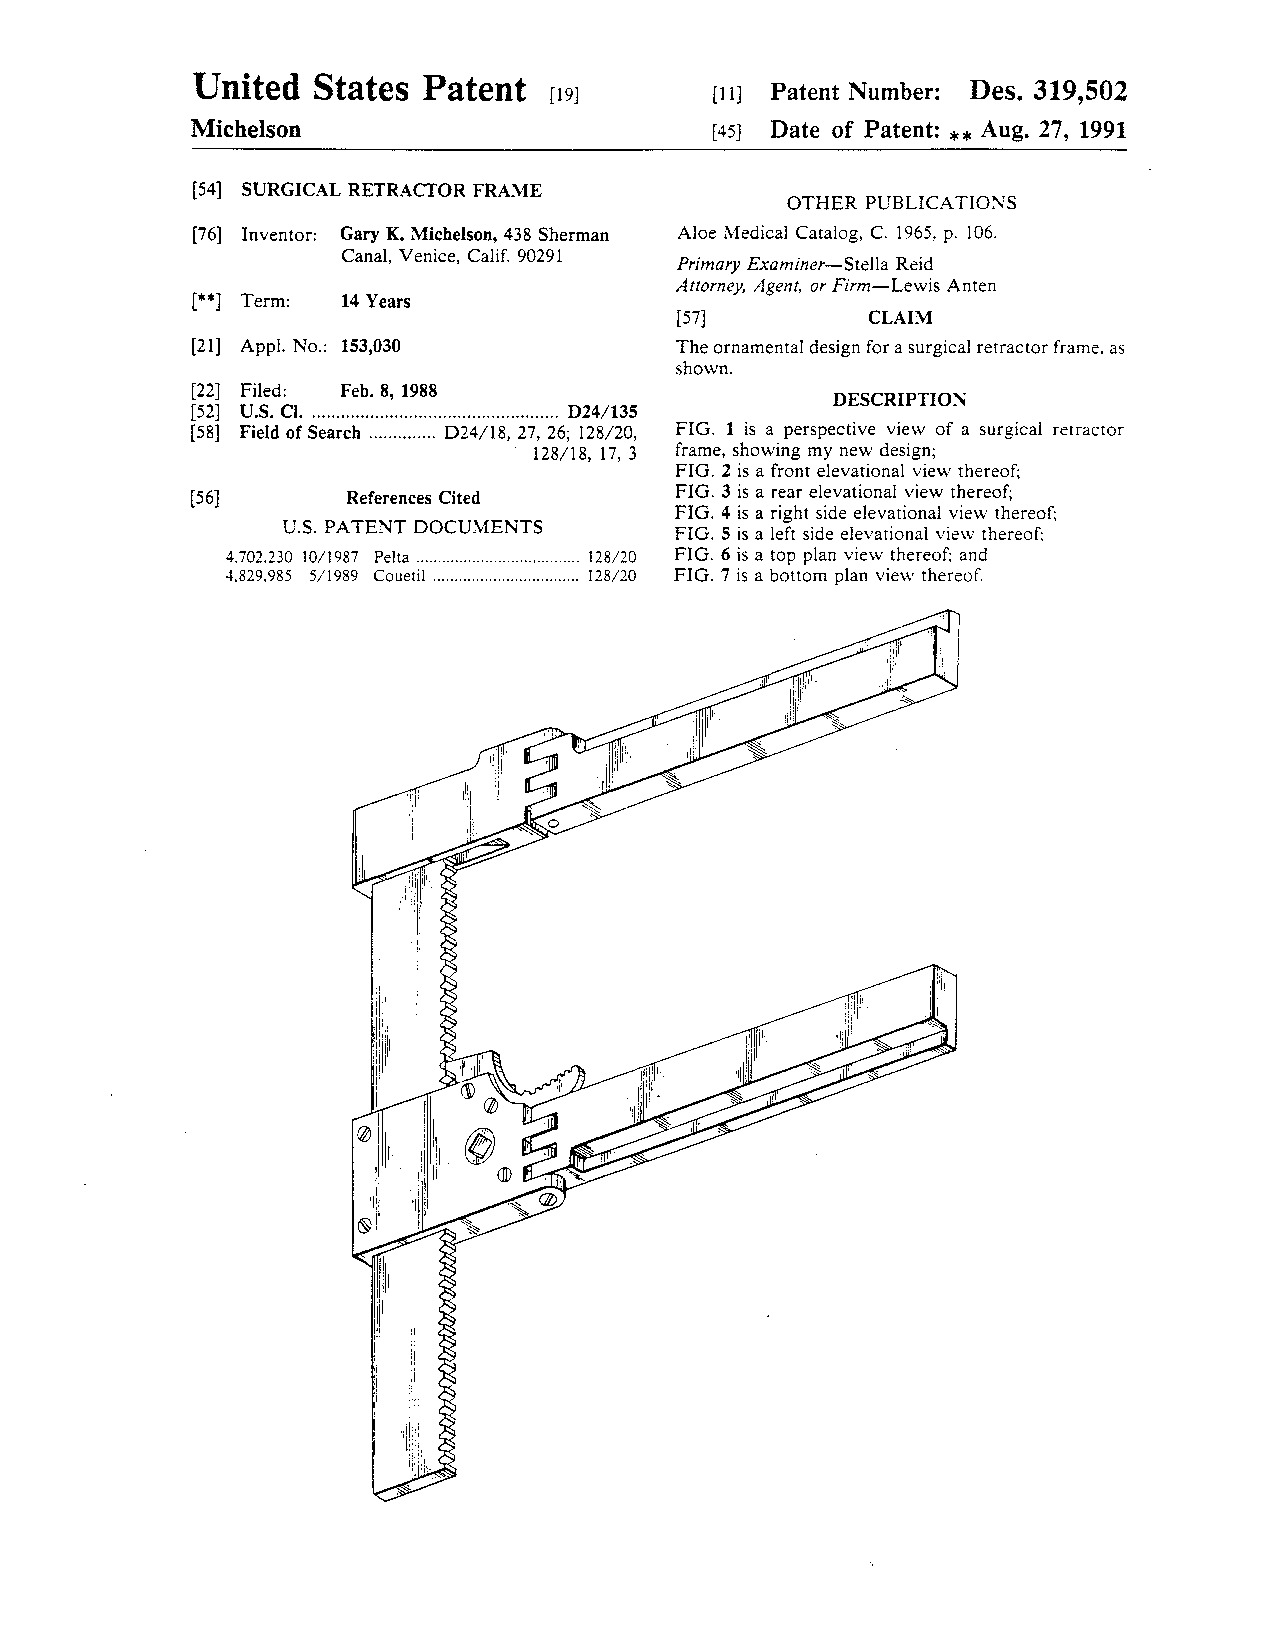 Surgical retractor frame - Patent D319,502